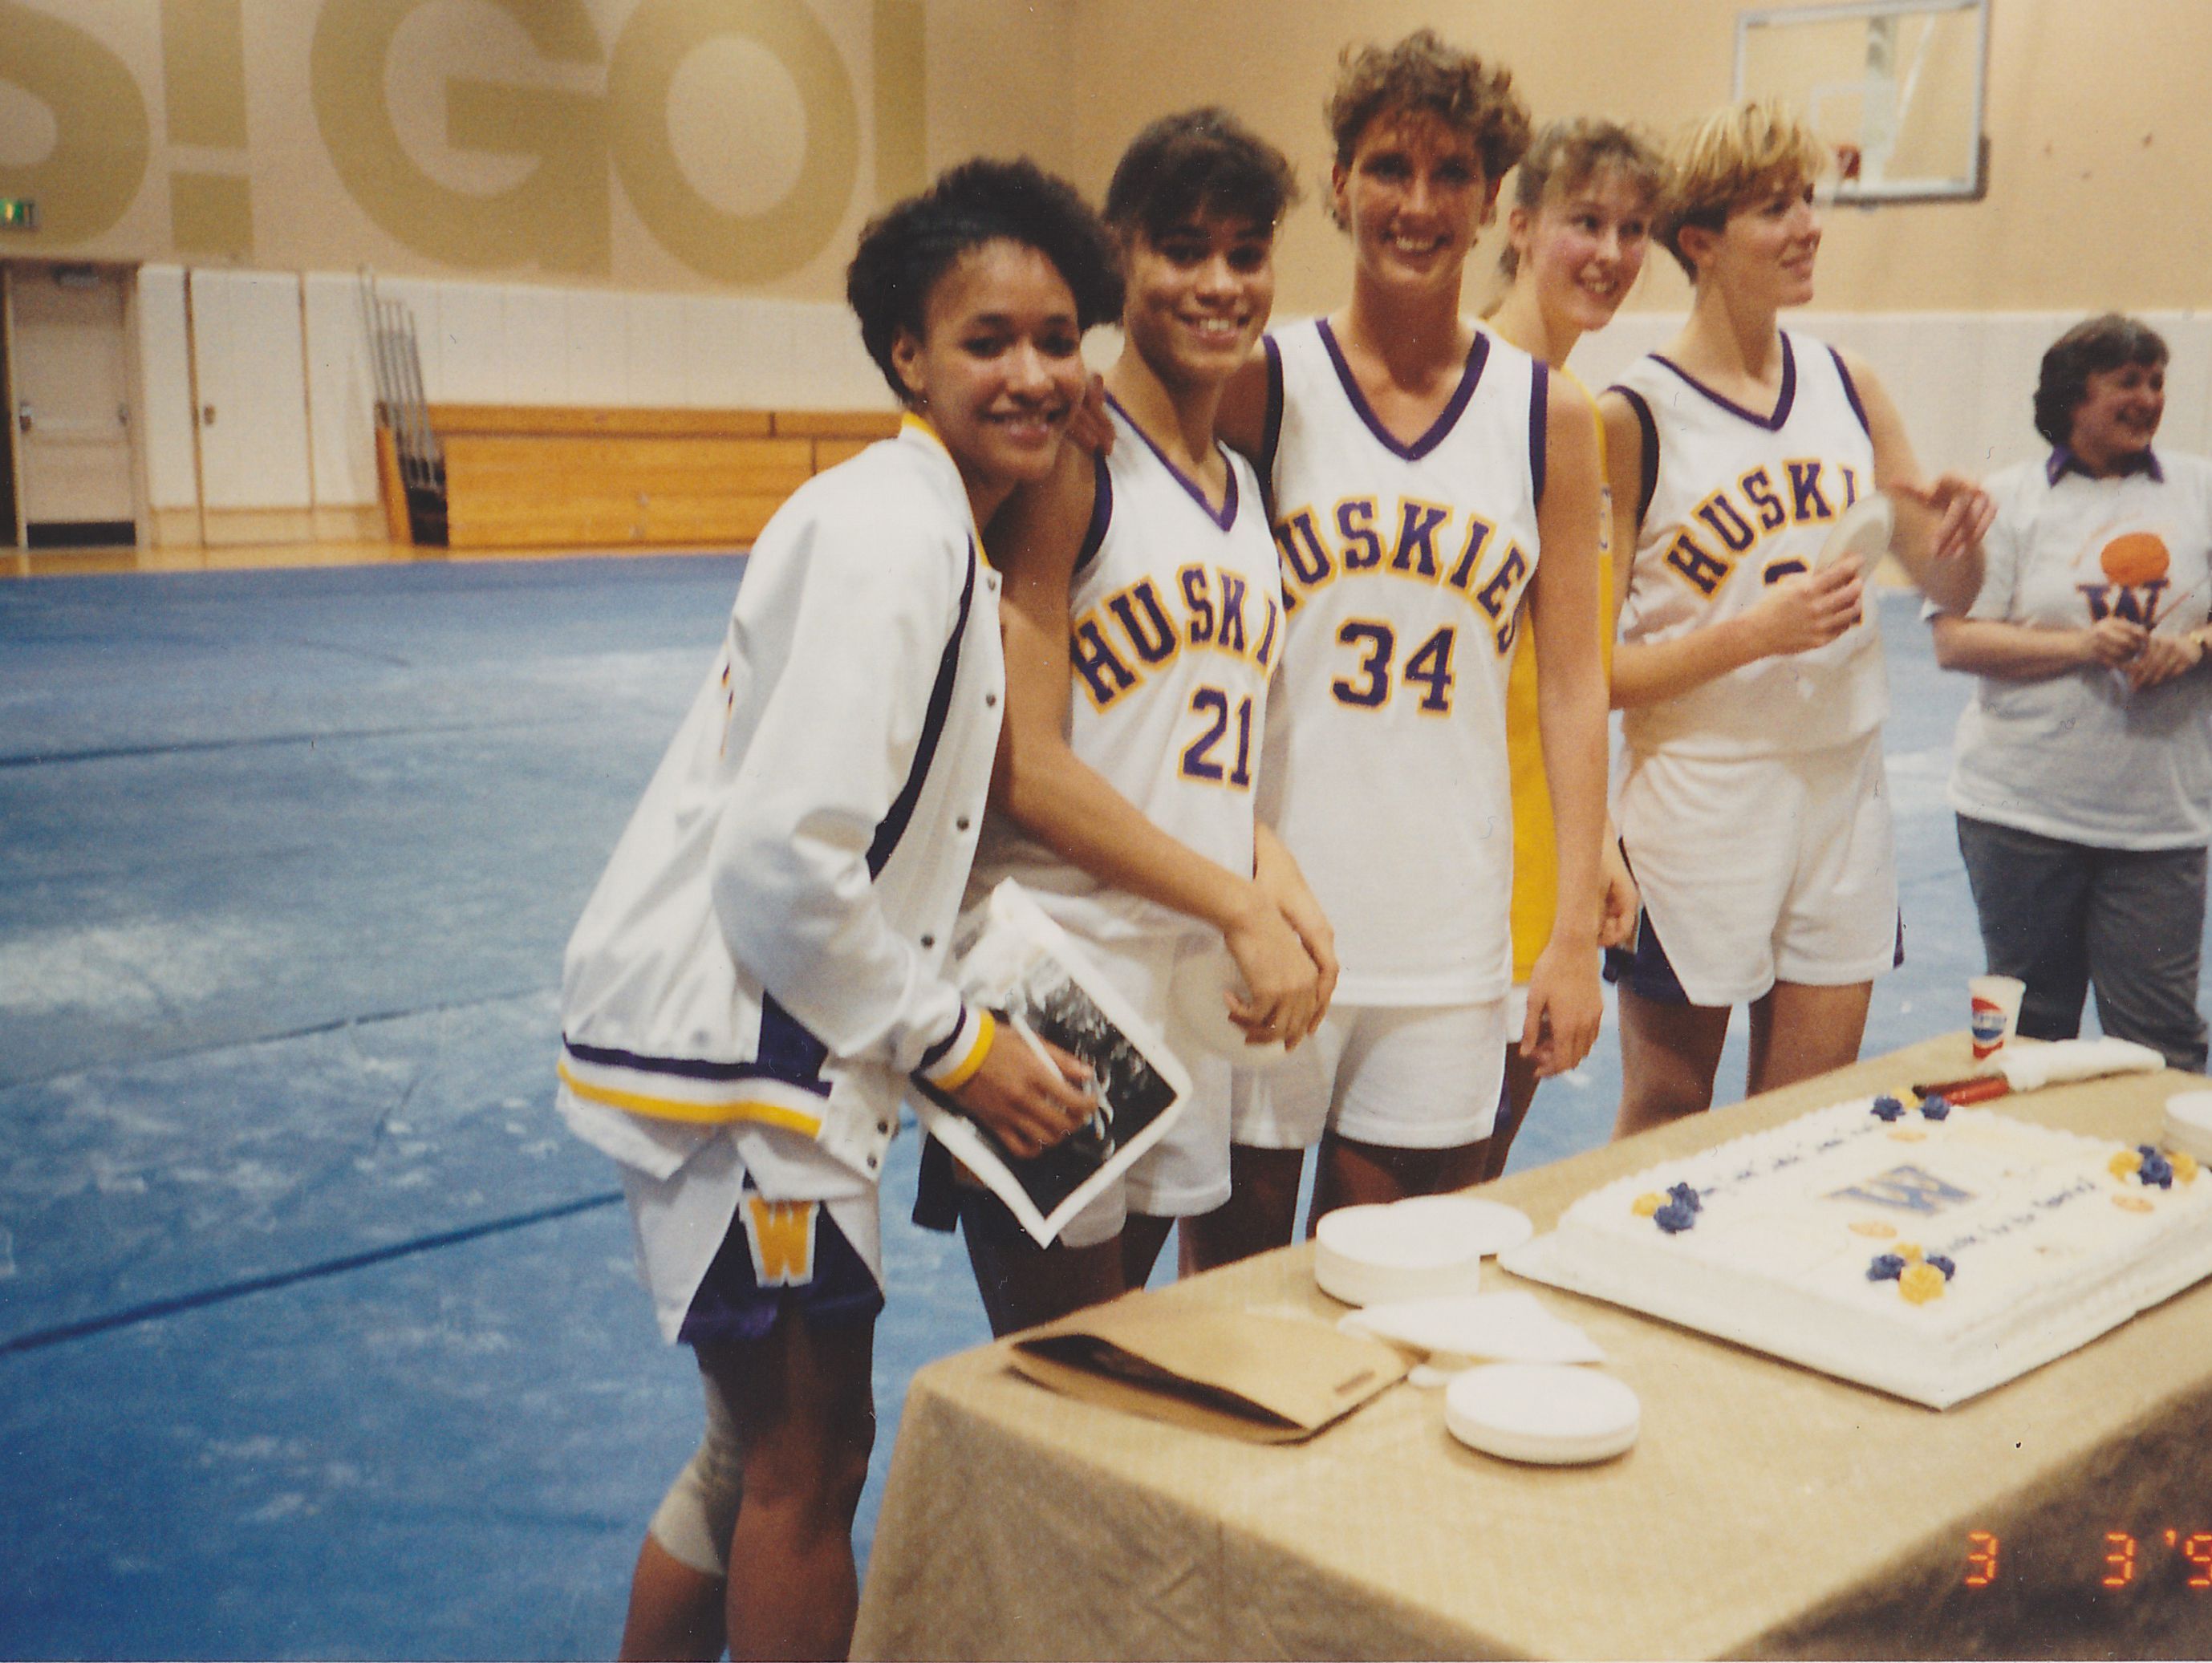 Amy Mickelson (34) and some of her teammates at Washington in March 1990.